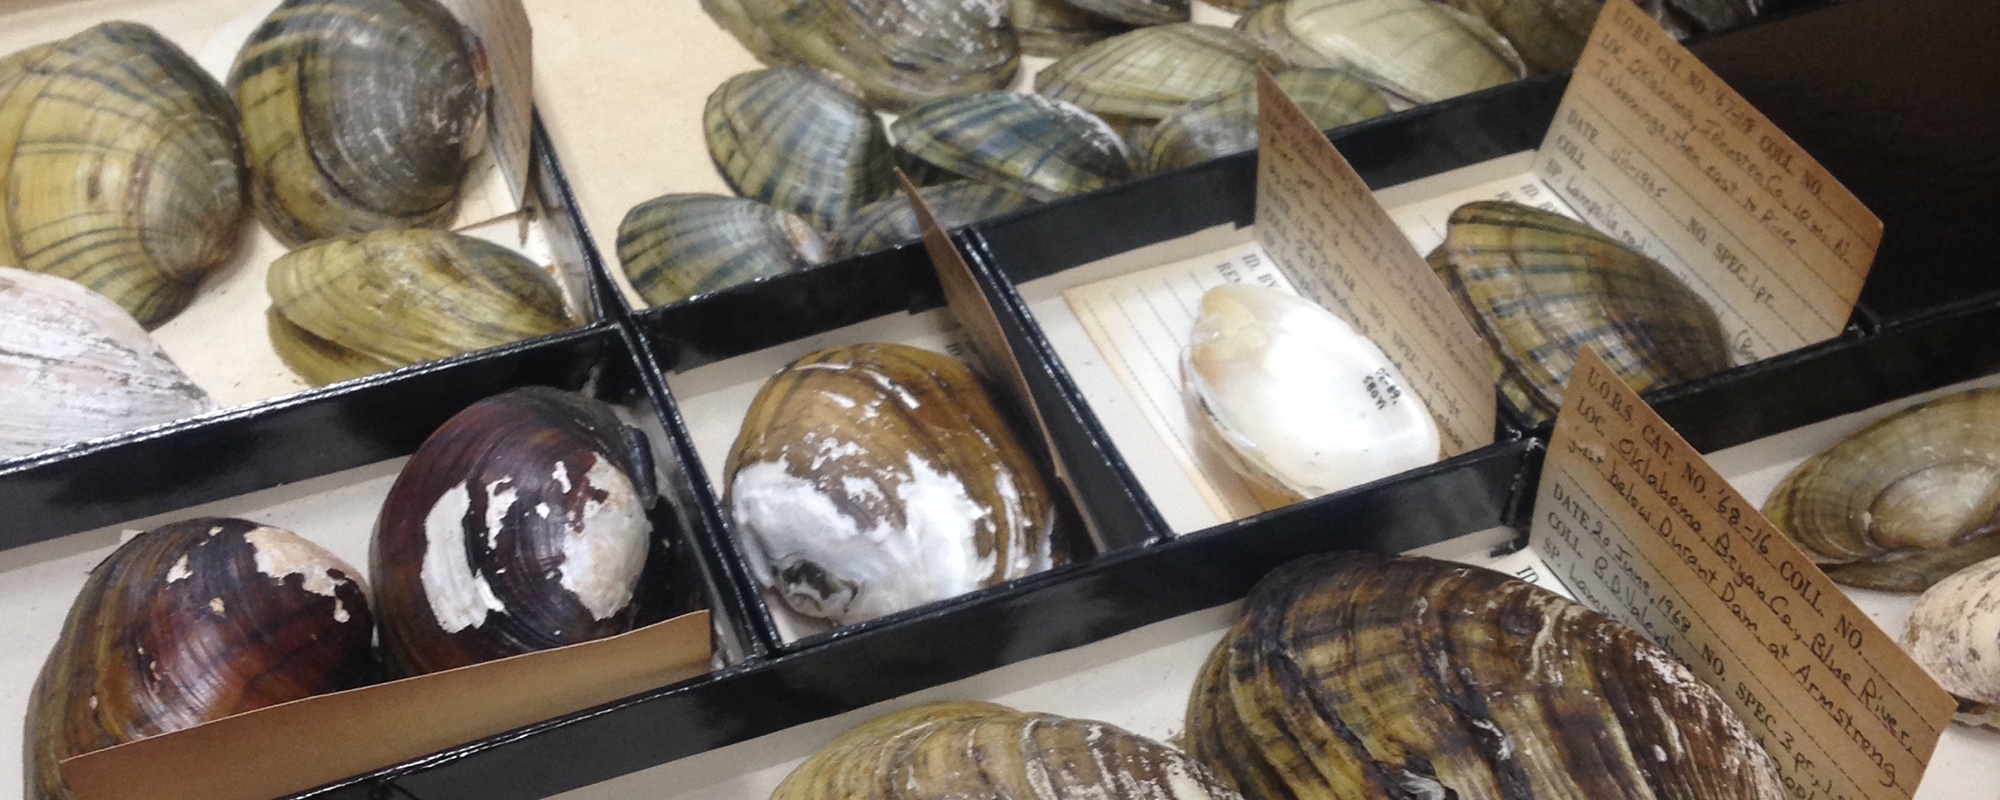 Mussel collections with data cards.